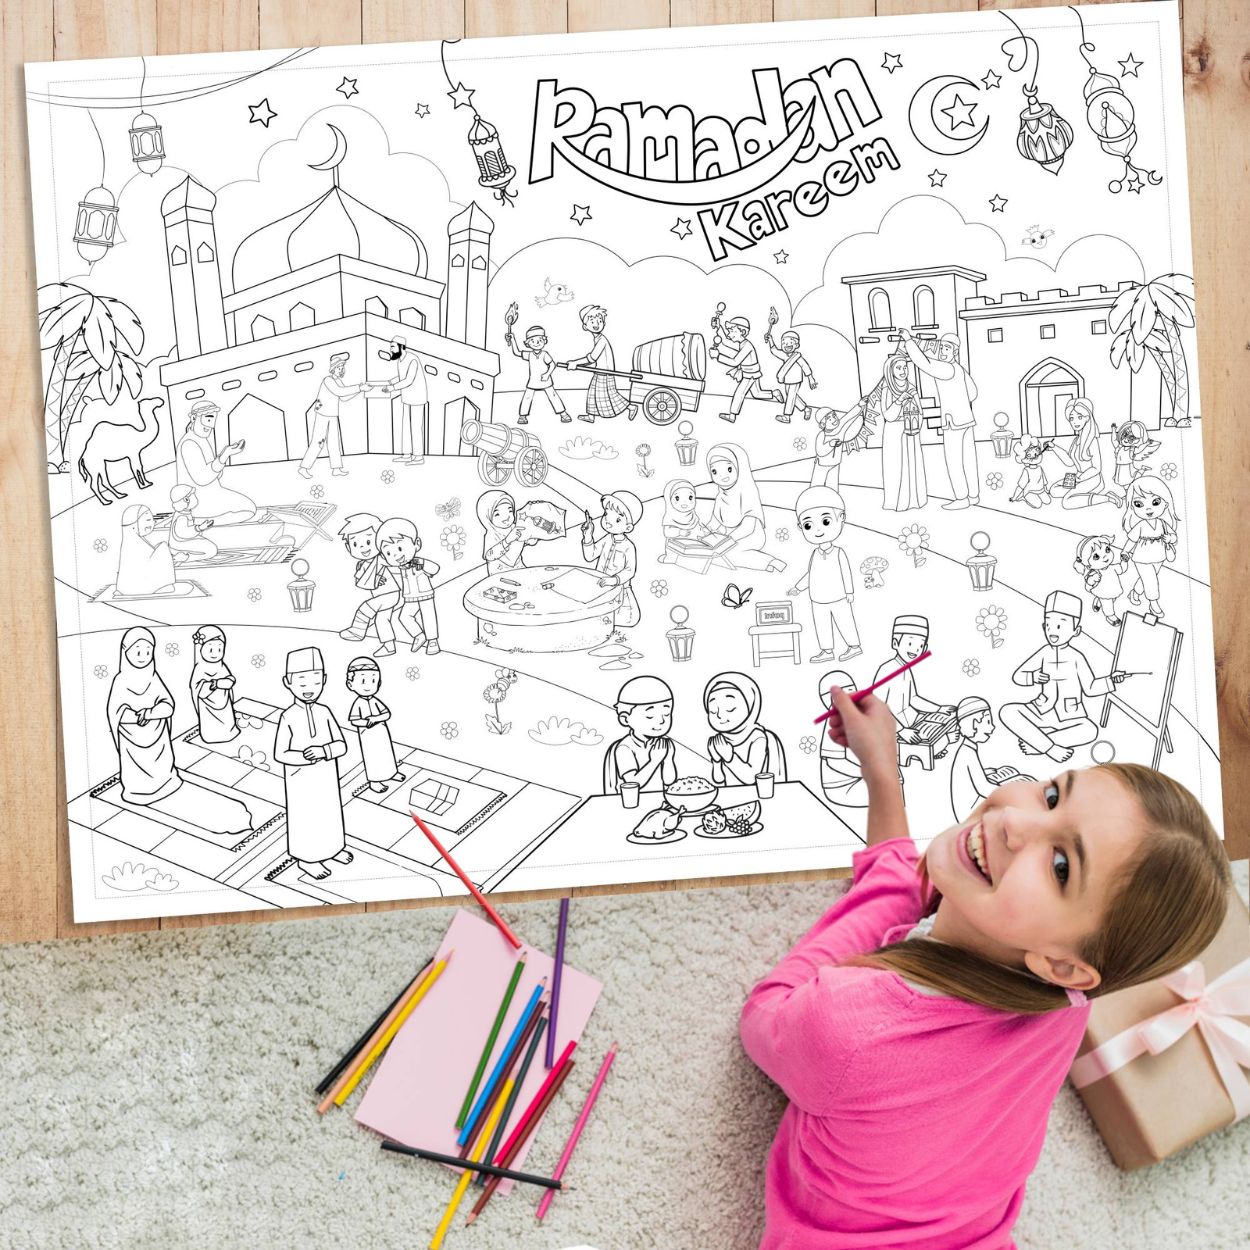 Ramadan Giant Coloring Poster for Kids 90x68 cm